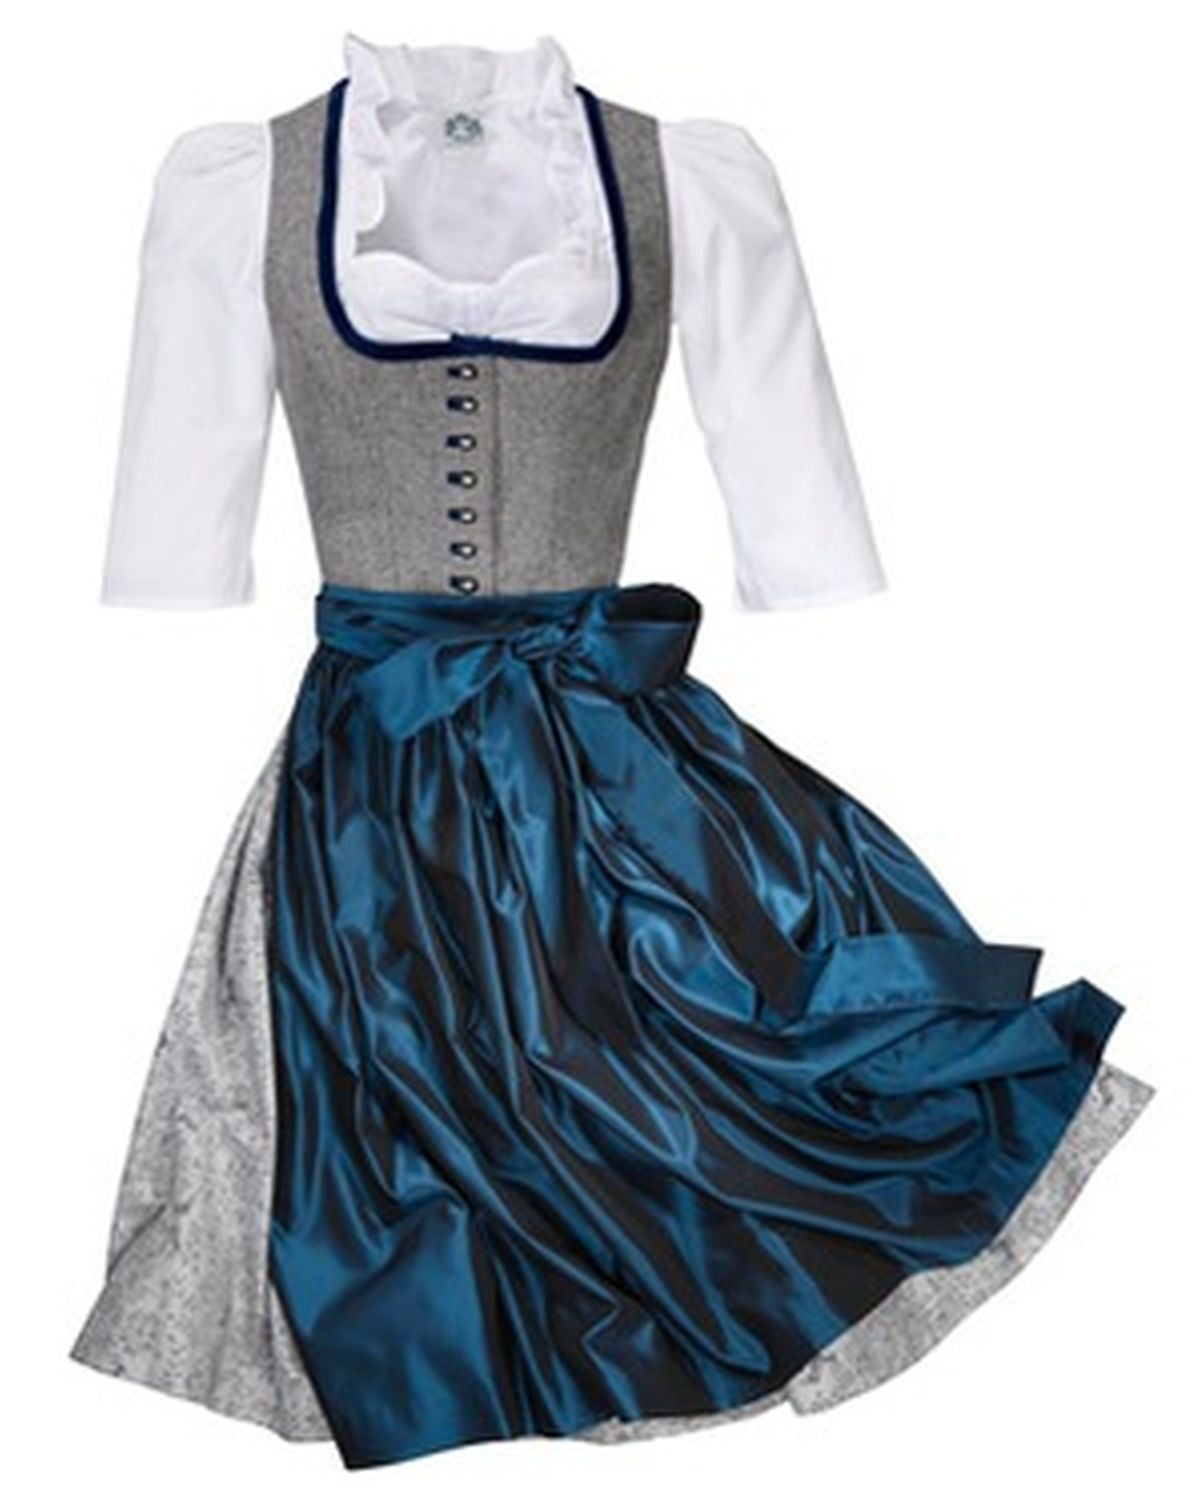 Wilkommen to the Dirndlfest! The New York Times and American Vogue recently paid homage to the dirndl, describing it as 'the most flattering dress a woman can wear' and the new fashion 'must-have.' Celebrity fans include Paris Hilton, Maria